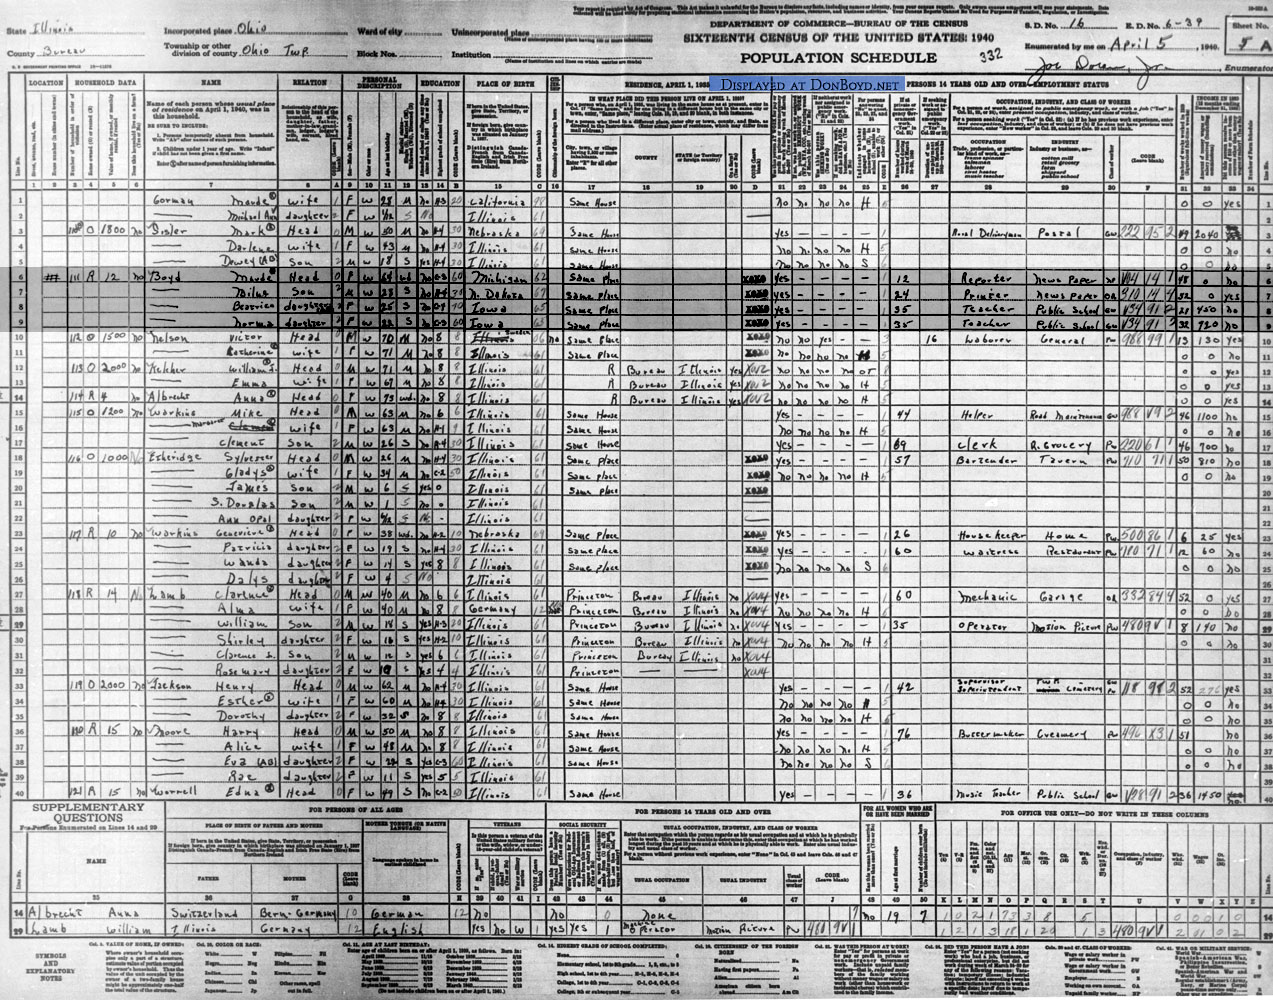 1940 - the Boyd family listed on the 1940 Census for residents of the town of Ohio, Bureau County, Illinois